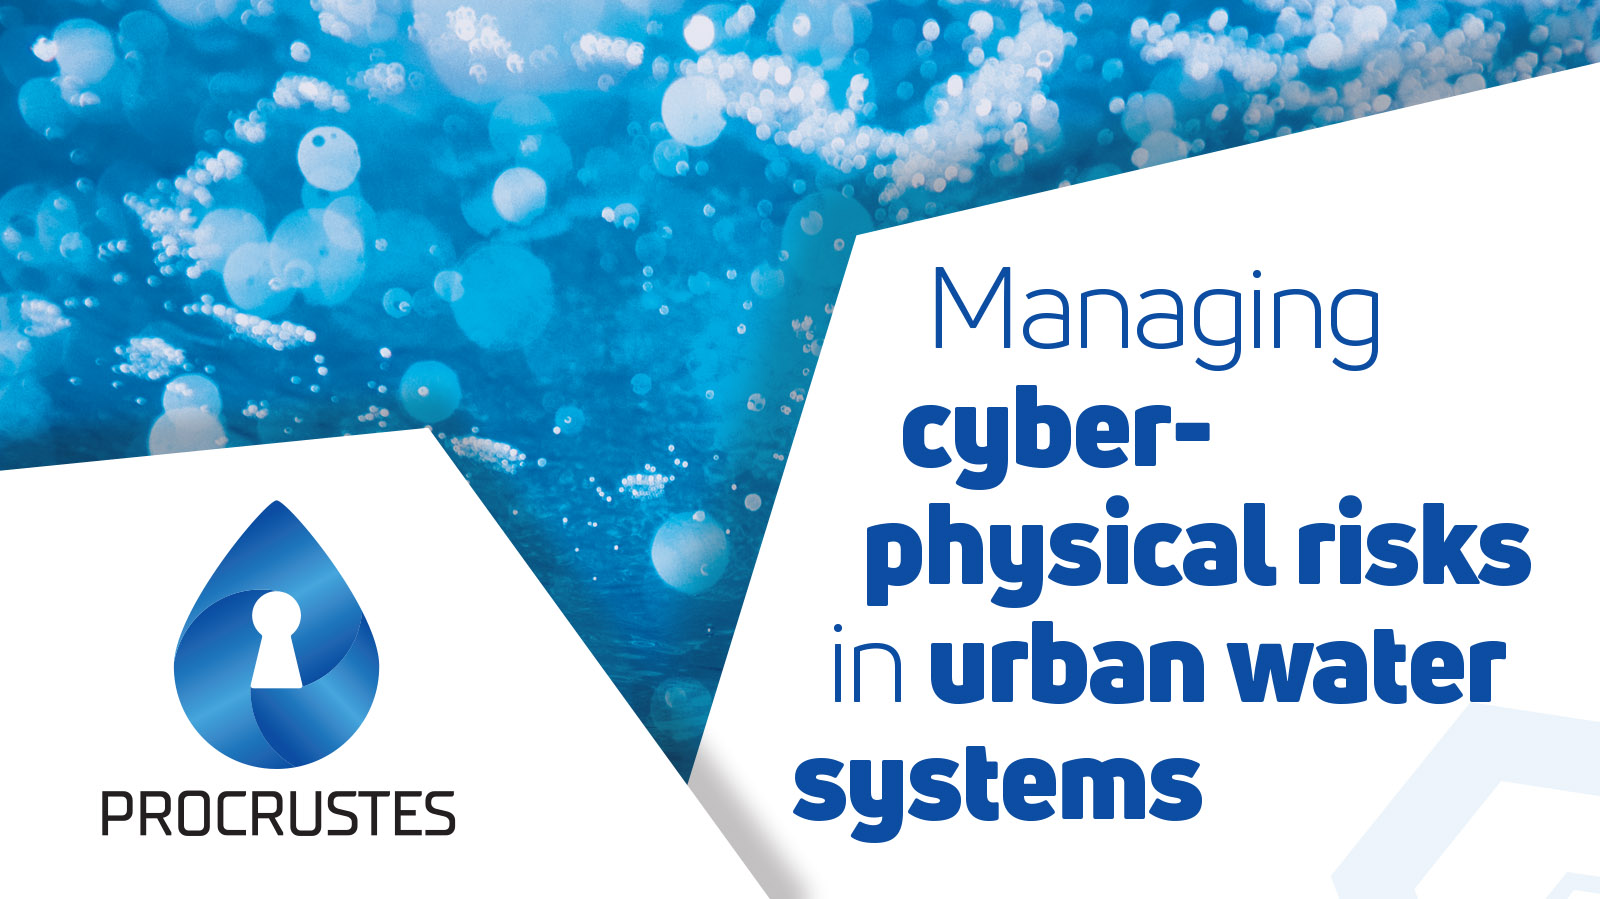 Successful PROCRUSTES workshop on “Managing cyber-physical risks in urban water systems” held in NTUA on 03/02/2023